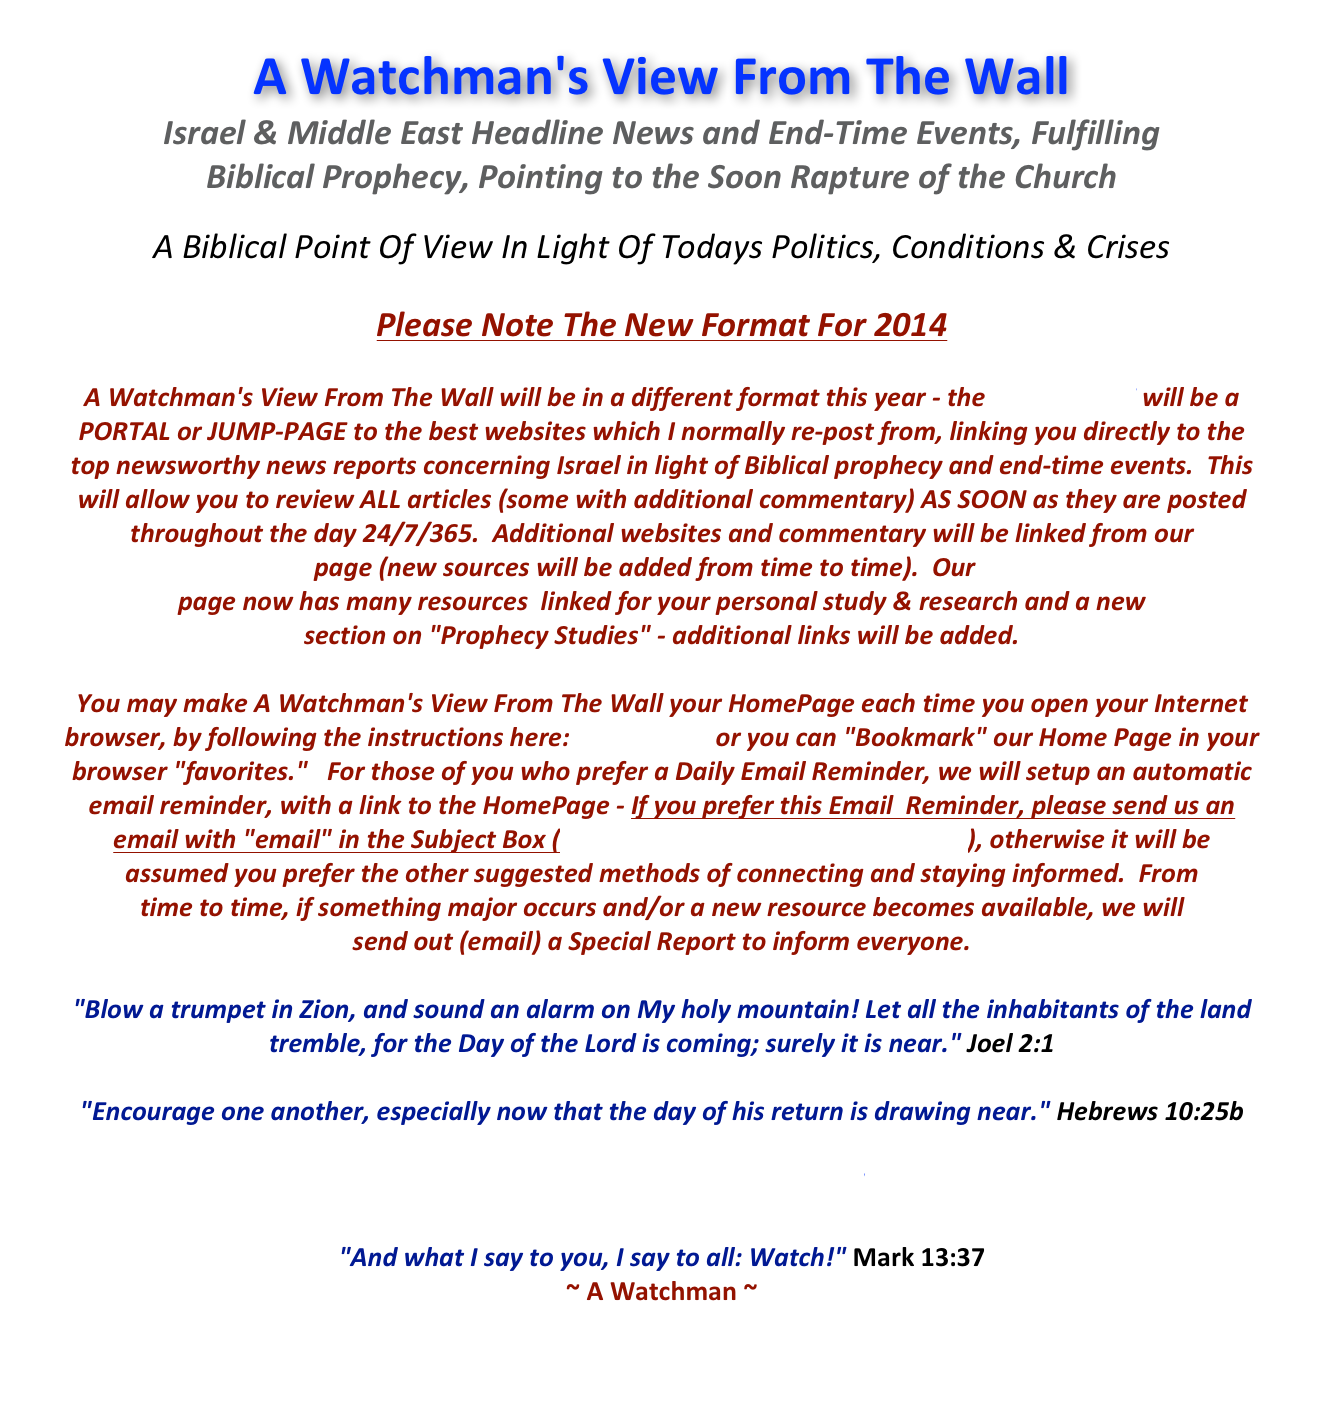 A Watchman's View From The Wall
Israel & Middle East Headline News and End-Time Events, Fulfilling  Biblical Prophecy, Pointing to the Soon Rapture of the Church 

A Biblical Point Of View In Light Of Todays Politics, Conditions & Crises

Please Note The New Format For 2014

A Watchman's View From The Wall will be in a different format this year - the HOME PAGE will be a  PORTAL or JUMP-PAGE to the best websites which I normally re-post from, linking you directly to the  top newsworthy news reports concerning Israel in light of Biblical prophecy and end-time events.  This  will allow you to review ALL articles (some with additional commentary) AS SOON as they are posted throughout the day 24/7/365.  Additional websites and commentary will be linked from our
Website Links page (new sources will be added from time to time).  Our Bible Study Links  page now has many resources  linked for your personal study & research and a new  section on "Prophecy Studies" - additional links will be added.

You may make A Watchman's View From The Wall your HomePage each time you open your Internet browser, by following the instructions here: HomePage  or you can "Bookmark" our Home Page in your browser "favorites."   For those of you who prefer a Daily Email Reminder, we will setup an automatic email reminder, with a link to the HomePage - If you prefer this Email  Reminder, please send us an  email with "email" in the Subject Box (Watchman@WatchmansView.com), otherwise it will be  assumed you prefer the other suggested methods of connecting and staying informed.  From  time to time, if something major occurs and/or a new resource becomes available, we will  send out (email) a Special Report to inform everyone.  

"Blow a trumpet in Zion, and sound an alarm on My holy mountain! Let all the inhabitants of the land tremble, for the Day of the Lord is coming; surely it is near." Joel 2:1

"Encourage one another, especially now that the day of his return is drawing near." Hebrews 10:25b

Go Back to the HOMEPAGE
 
"And what I say to you, I say to all: Watch!" Mark 13:37
~ A Watchman ~


